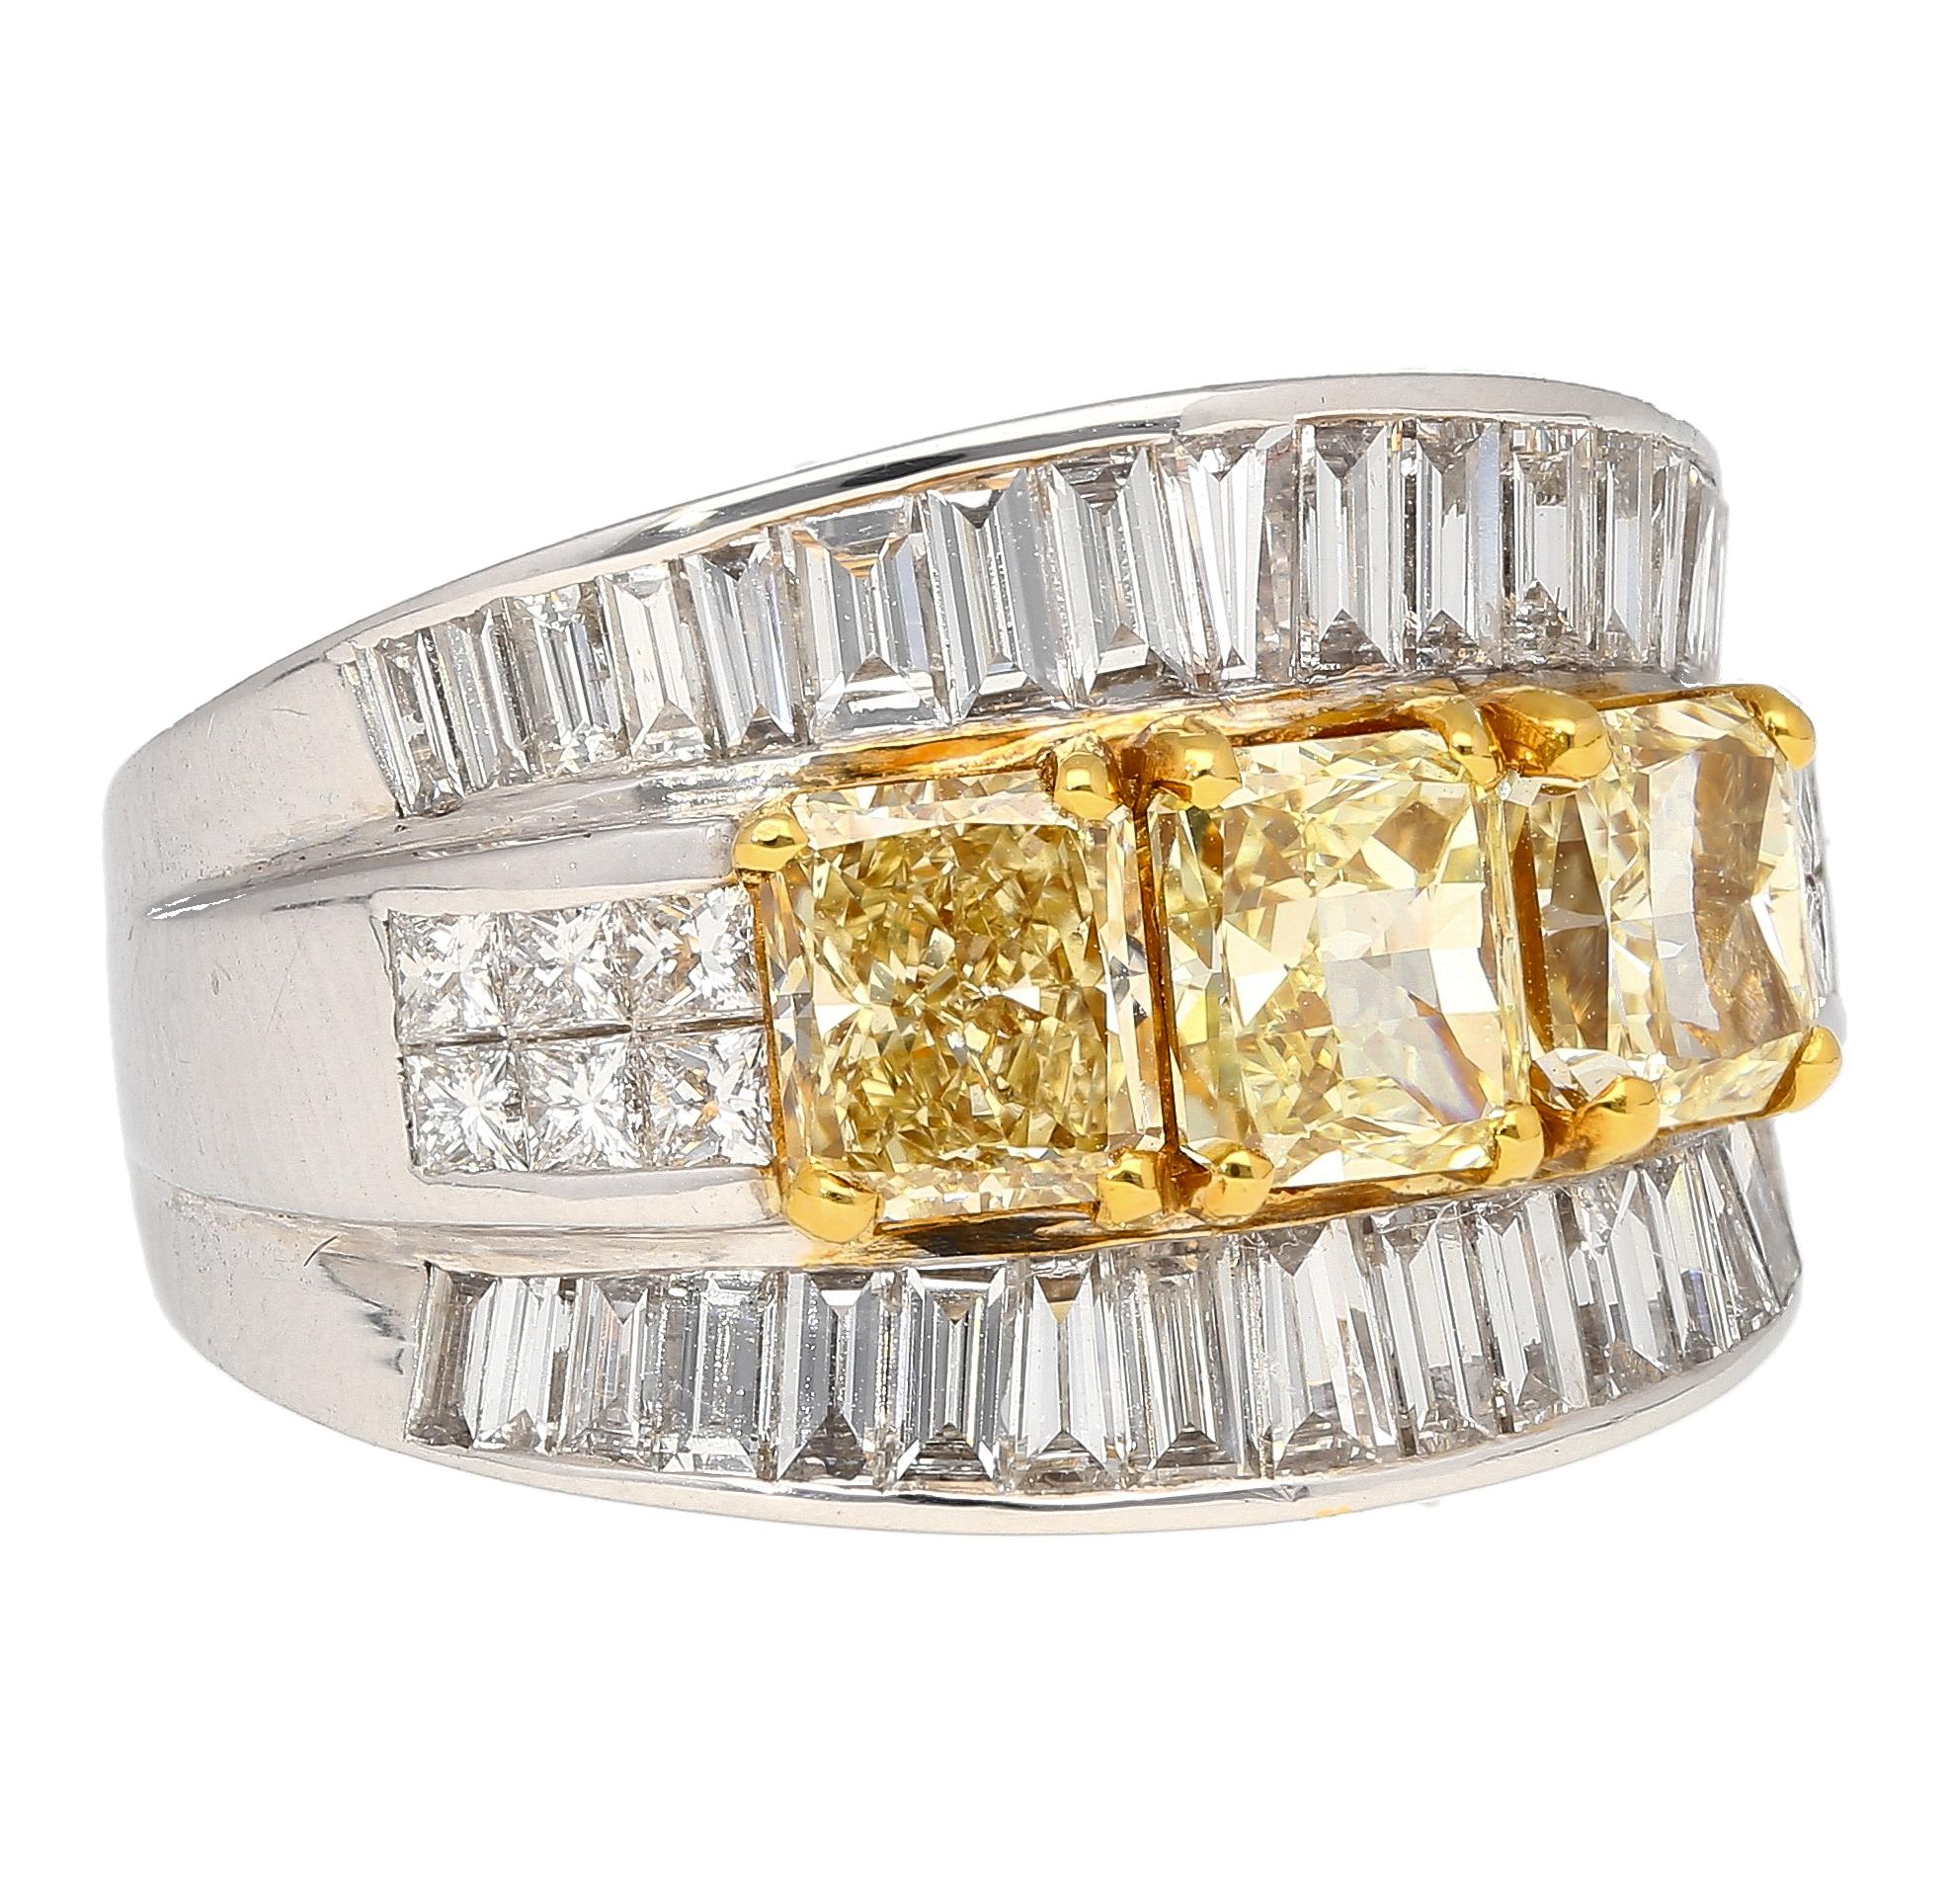 Presenting our Natural Diamond Cluster Ring, a true marvel of exquisite craftsmanship. This remarkable piece features three radiant-cut fancy yellow diamonds elegantly positioned side by side, complemented by two rows of princess-cut white diamonds